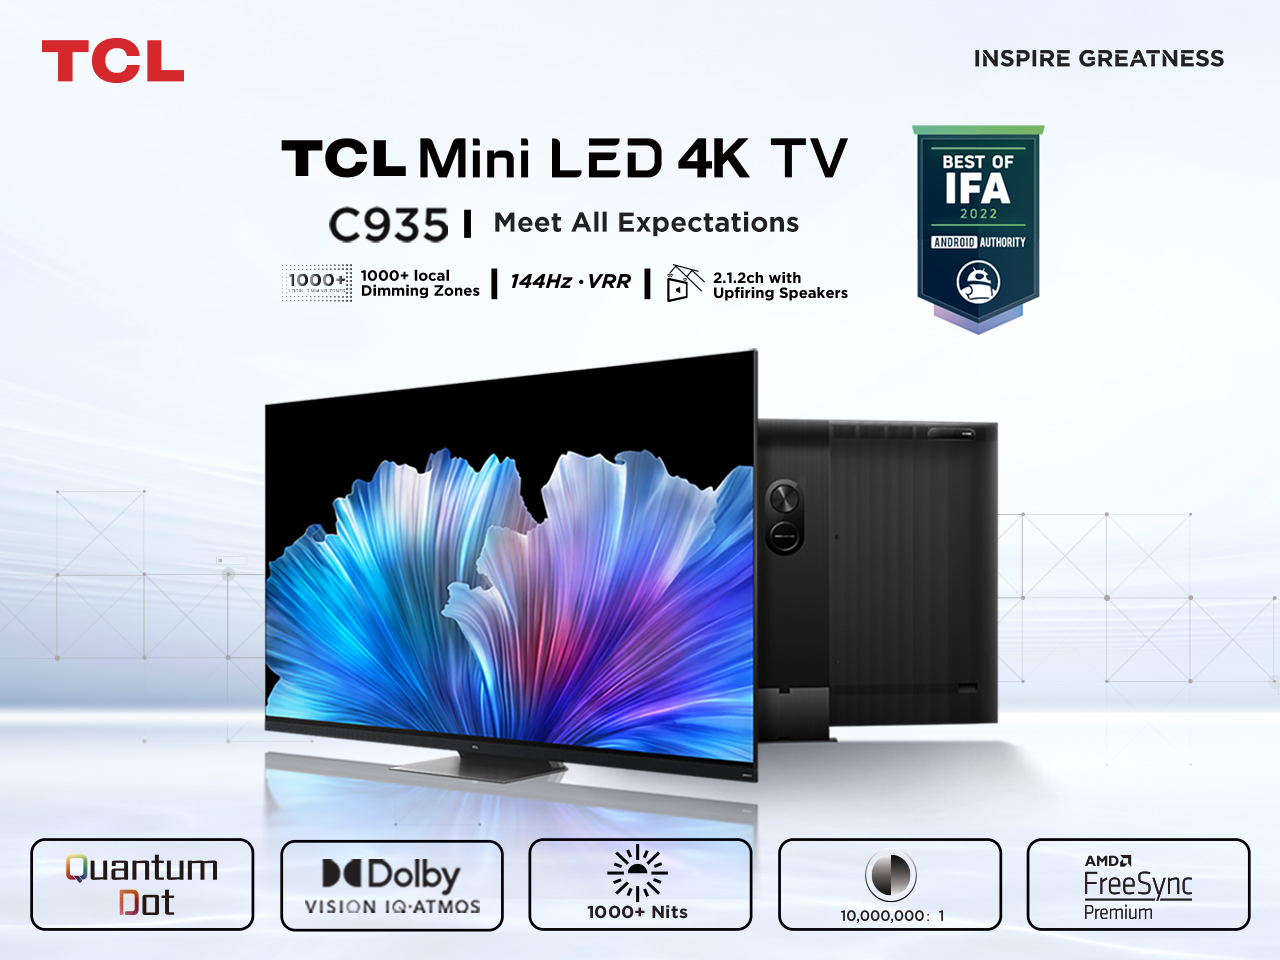 TCL C935 - A Smart 4K Mini LED TV with All the Premium Features You Want